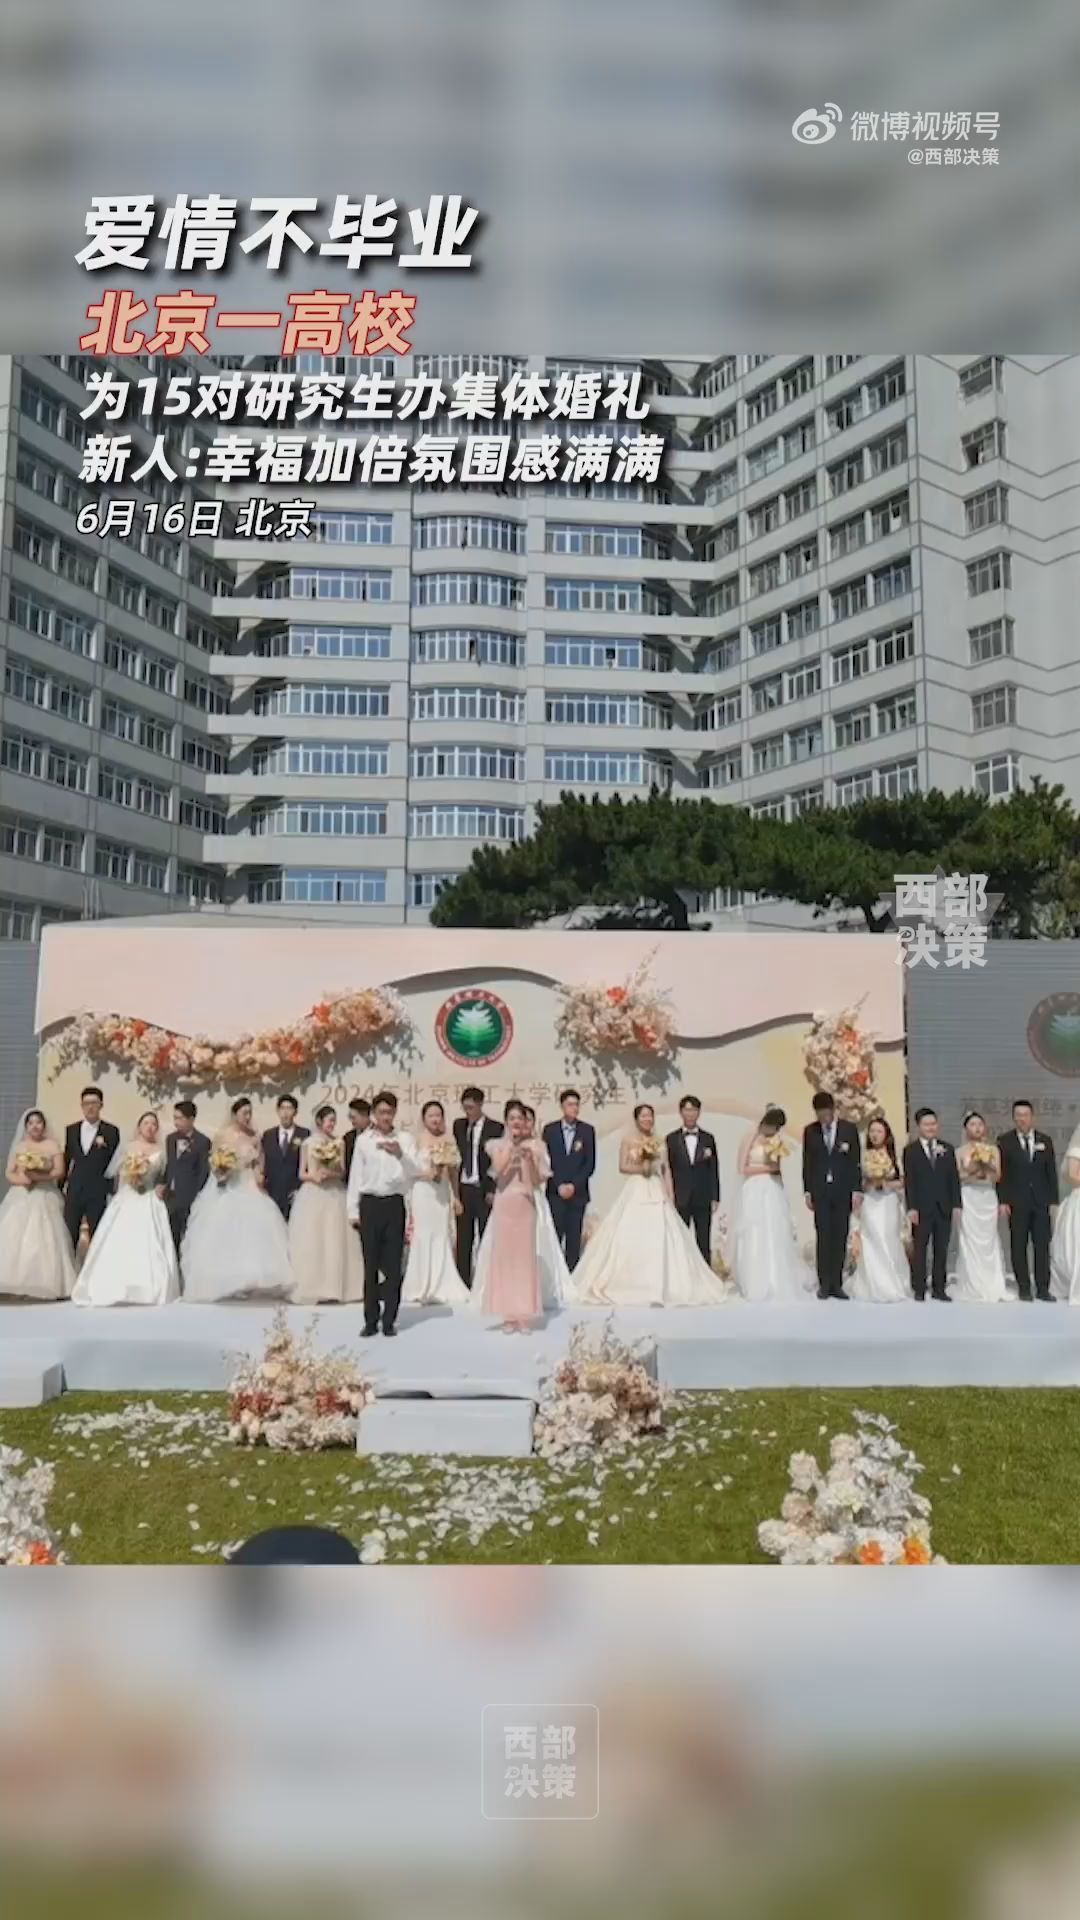  A university in Beijing held a group wedding ceremony for 15 pairs of graduate students